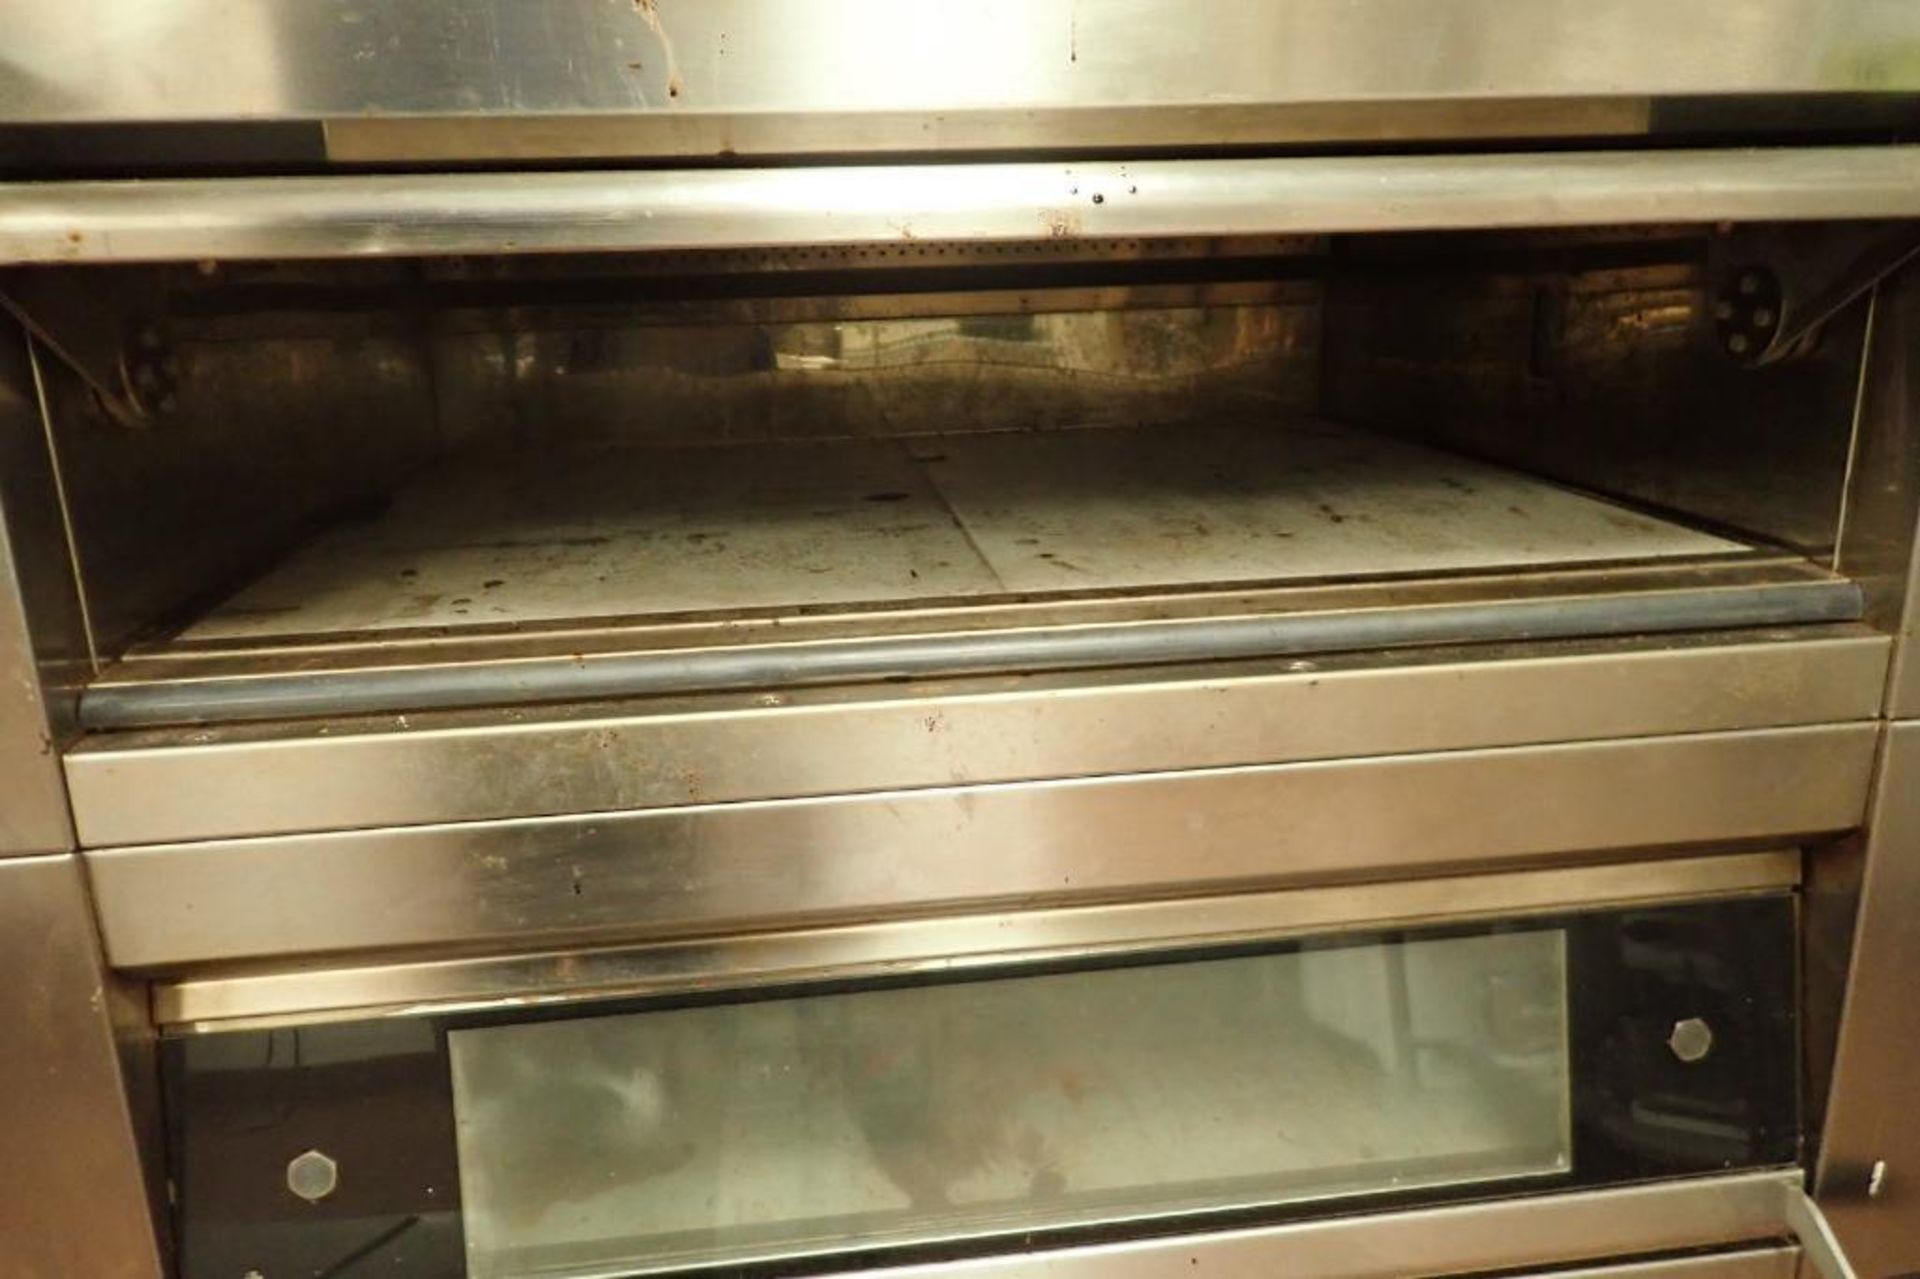 Doyon SM 3 tier oven, Model 2T3, SN 104599, 208 volt, 3 phase, 54 in. wide x 39 in. deep x 73 in. ta - Image 4 of 7